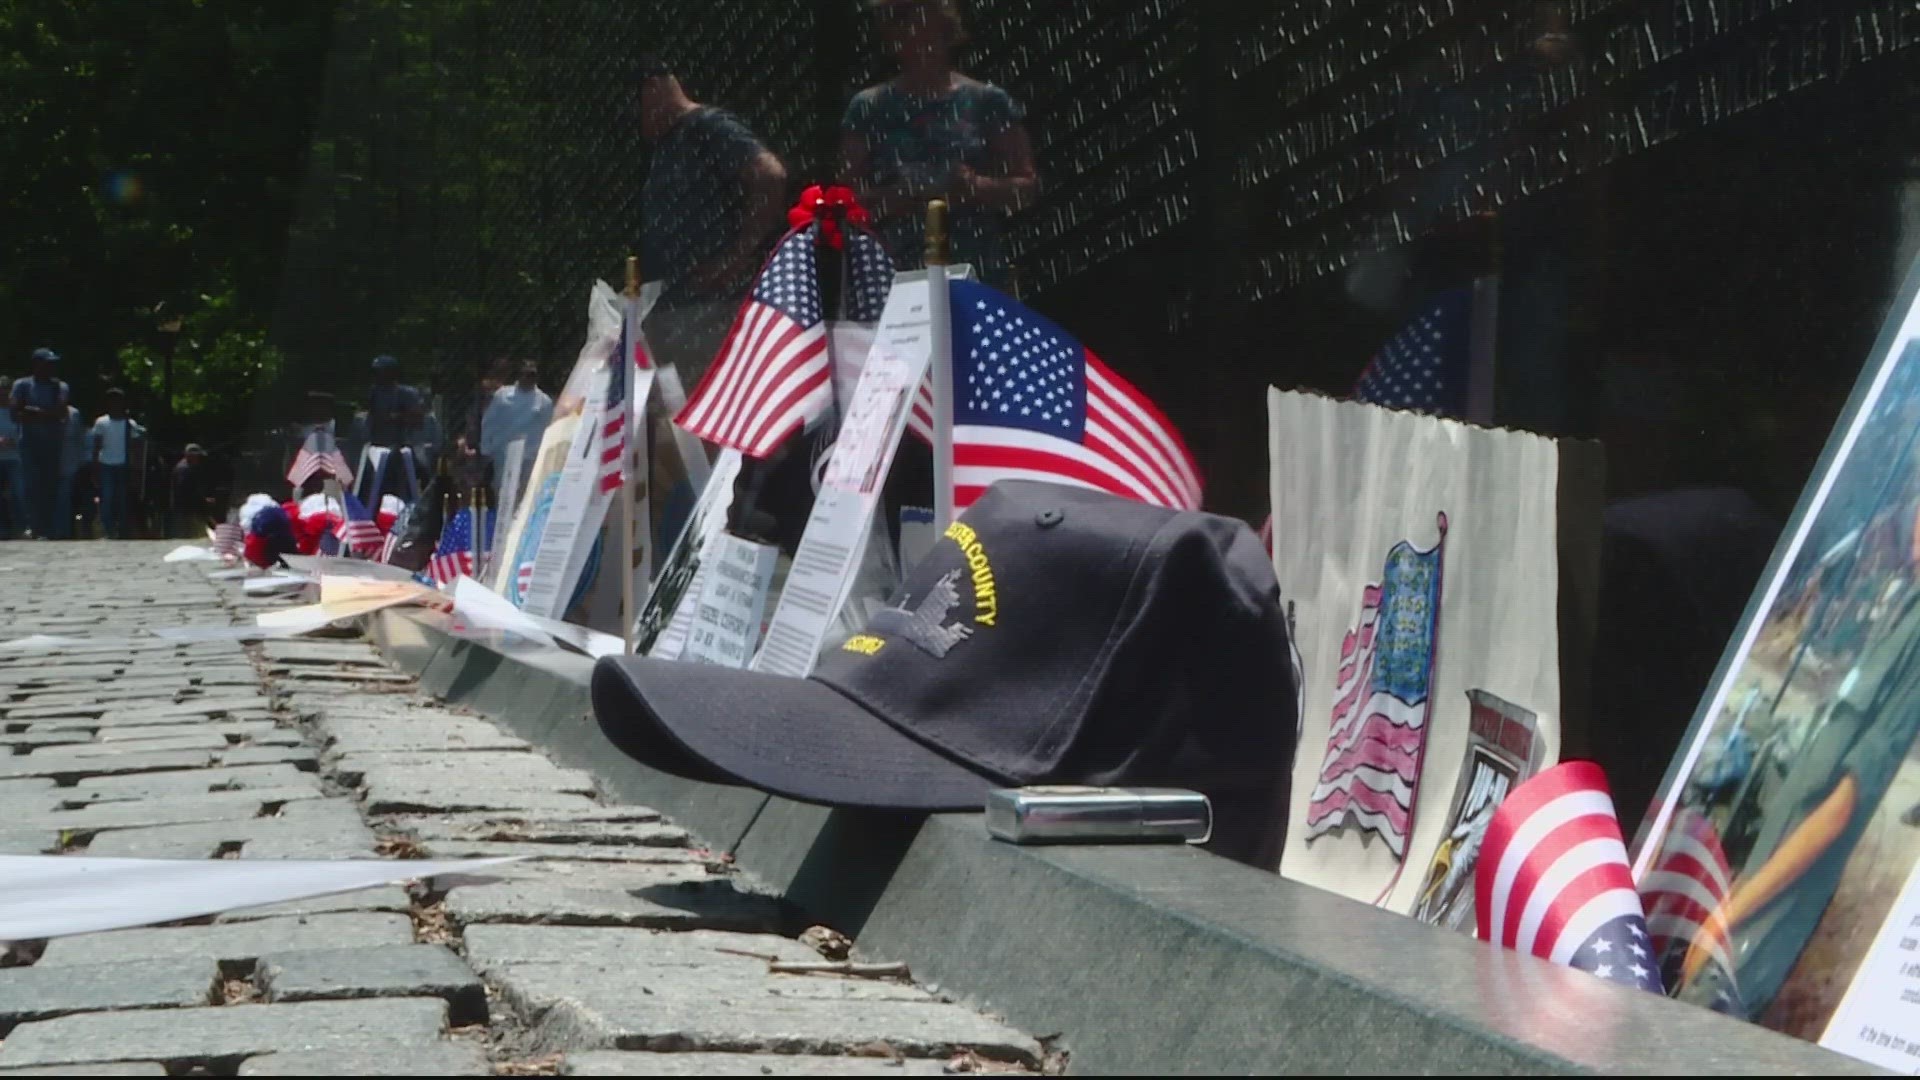 Here is a rundown of events happening in DC for Memorial Day.